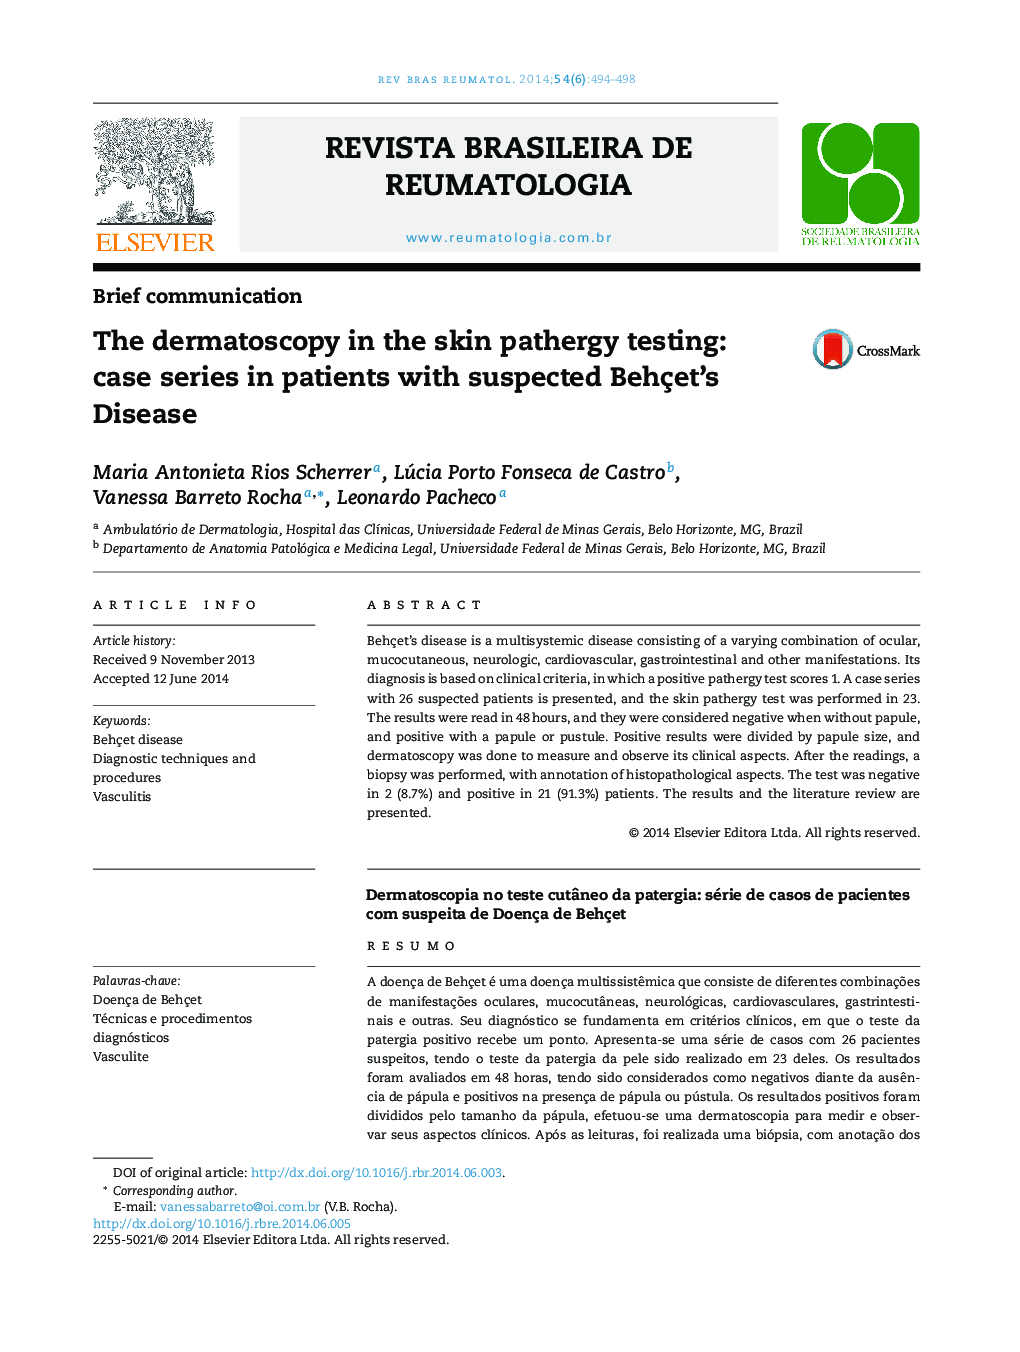 The dermatoscopy in the skin pathergy testing: case series in patients with suspected Behçet's Disease